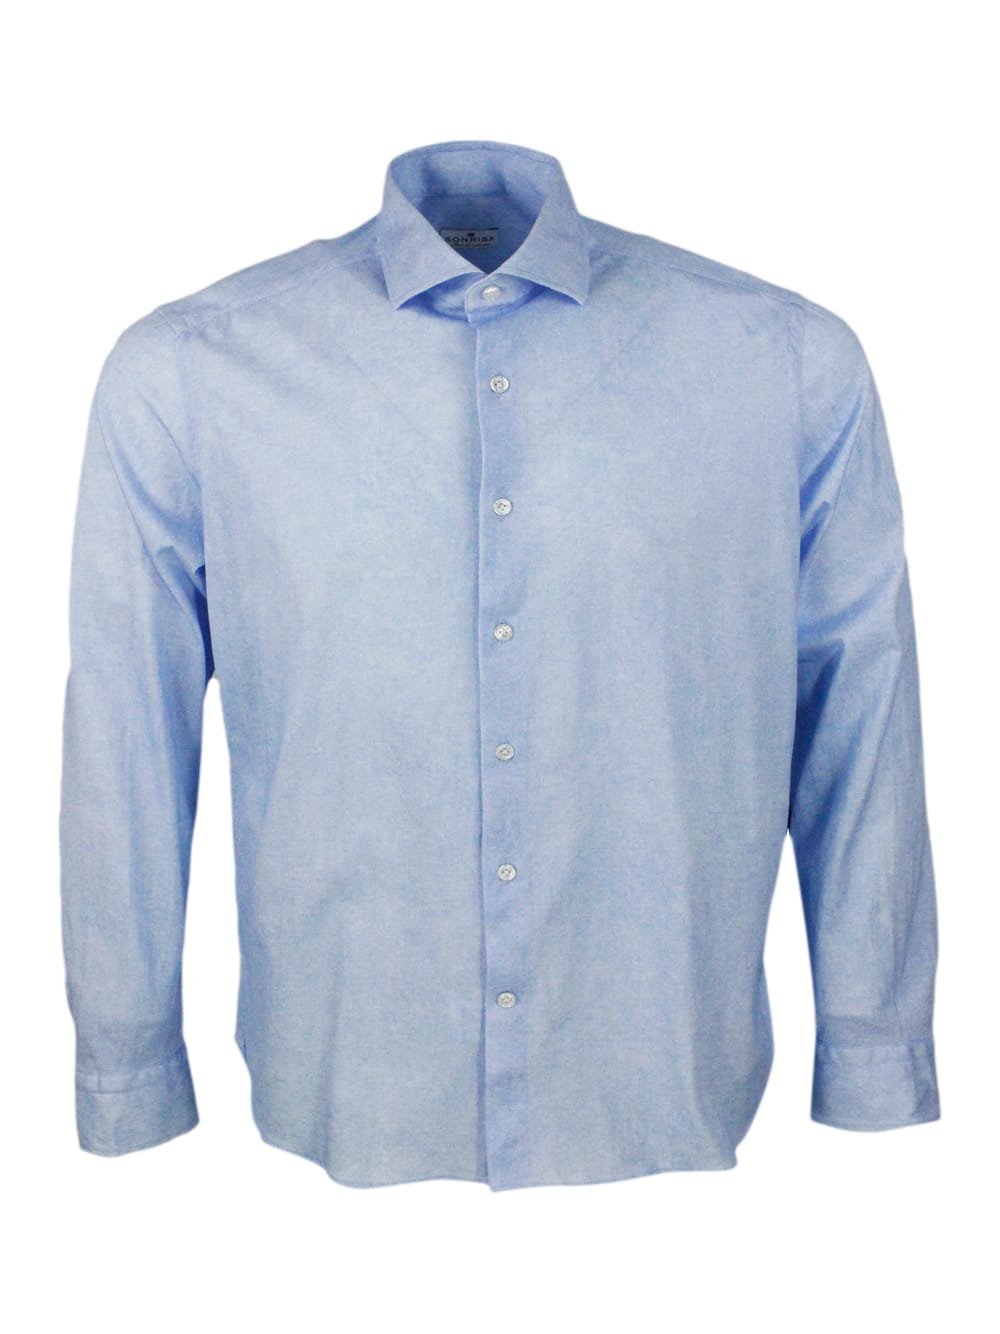 Shop Sonrisa Luxury Shirt In Soft, Precious And Very Fine Stretch Cotton Flower With Spread Collar In Two-tone Me In Light Blu